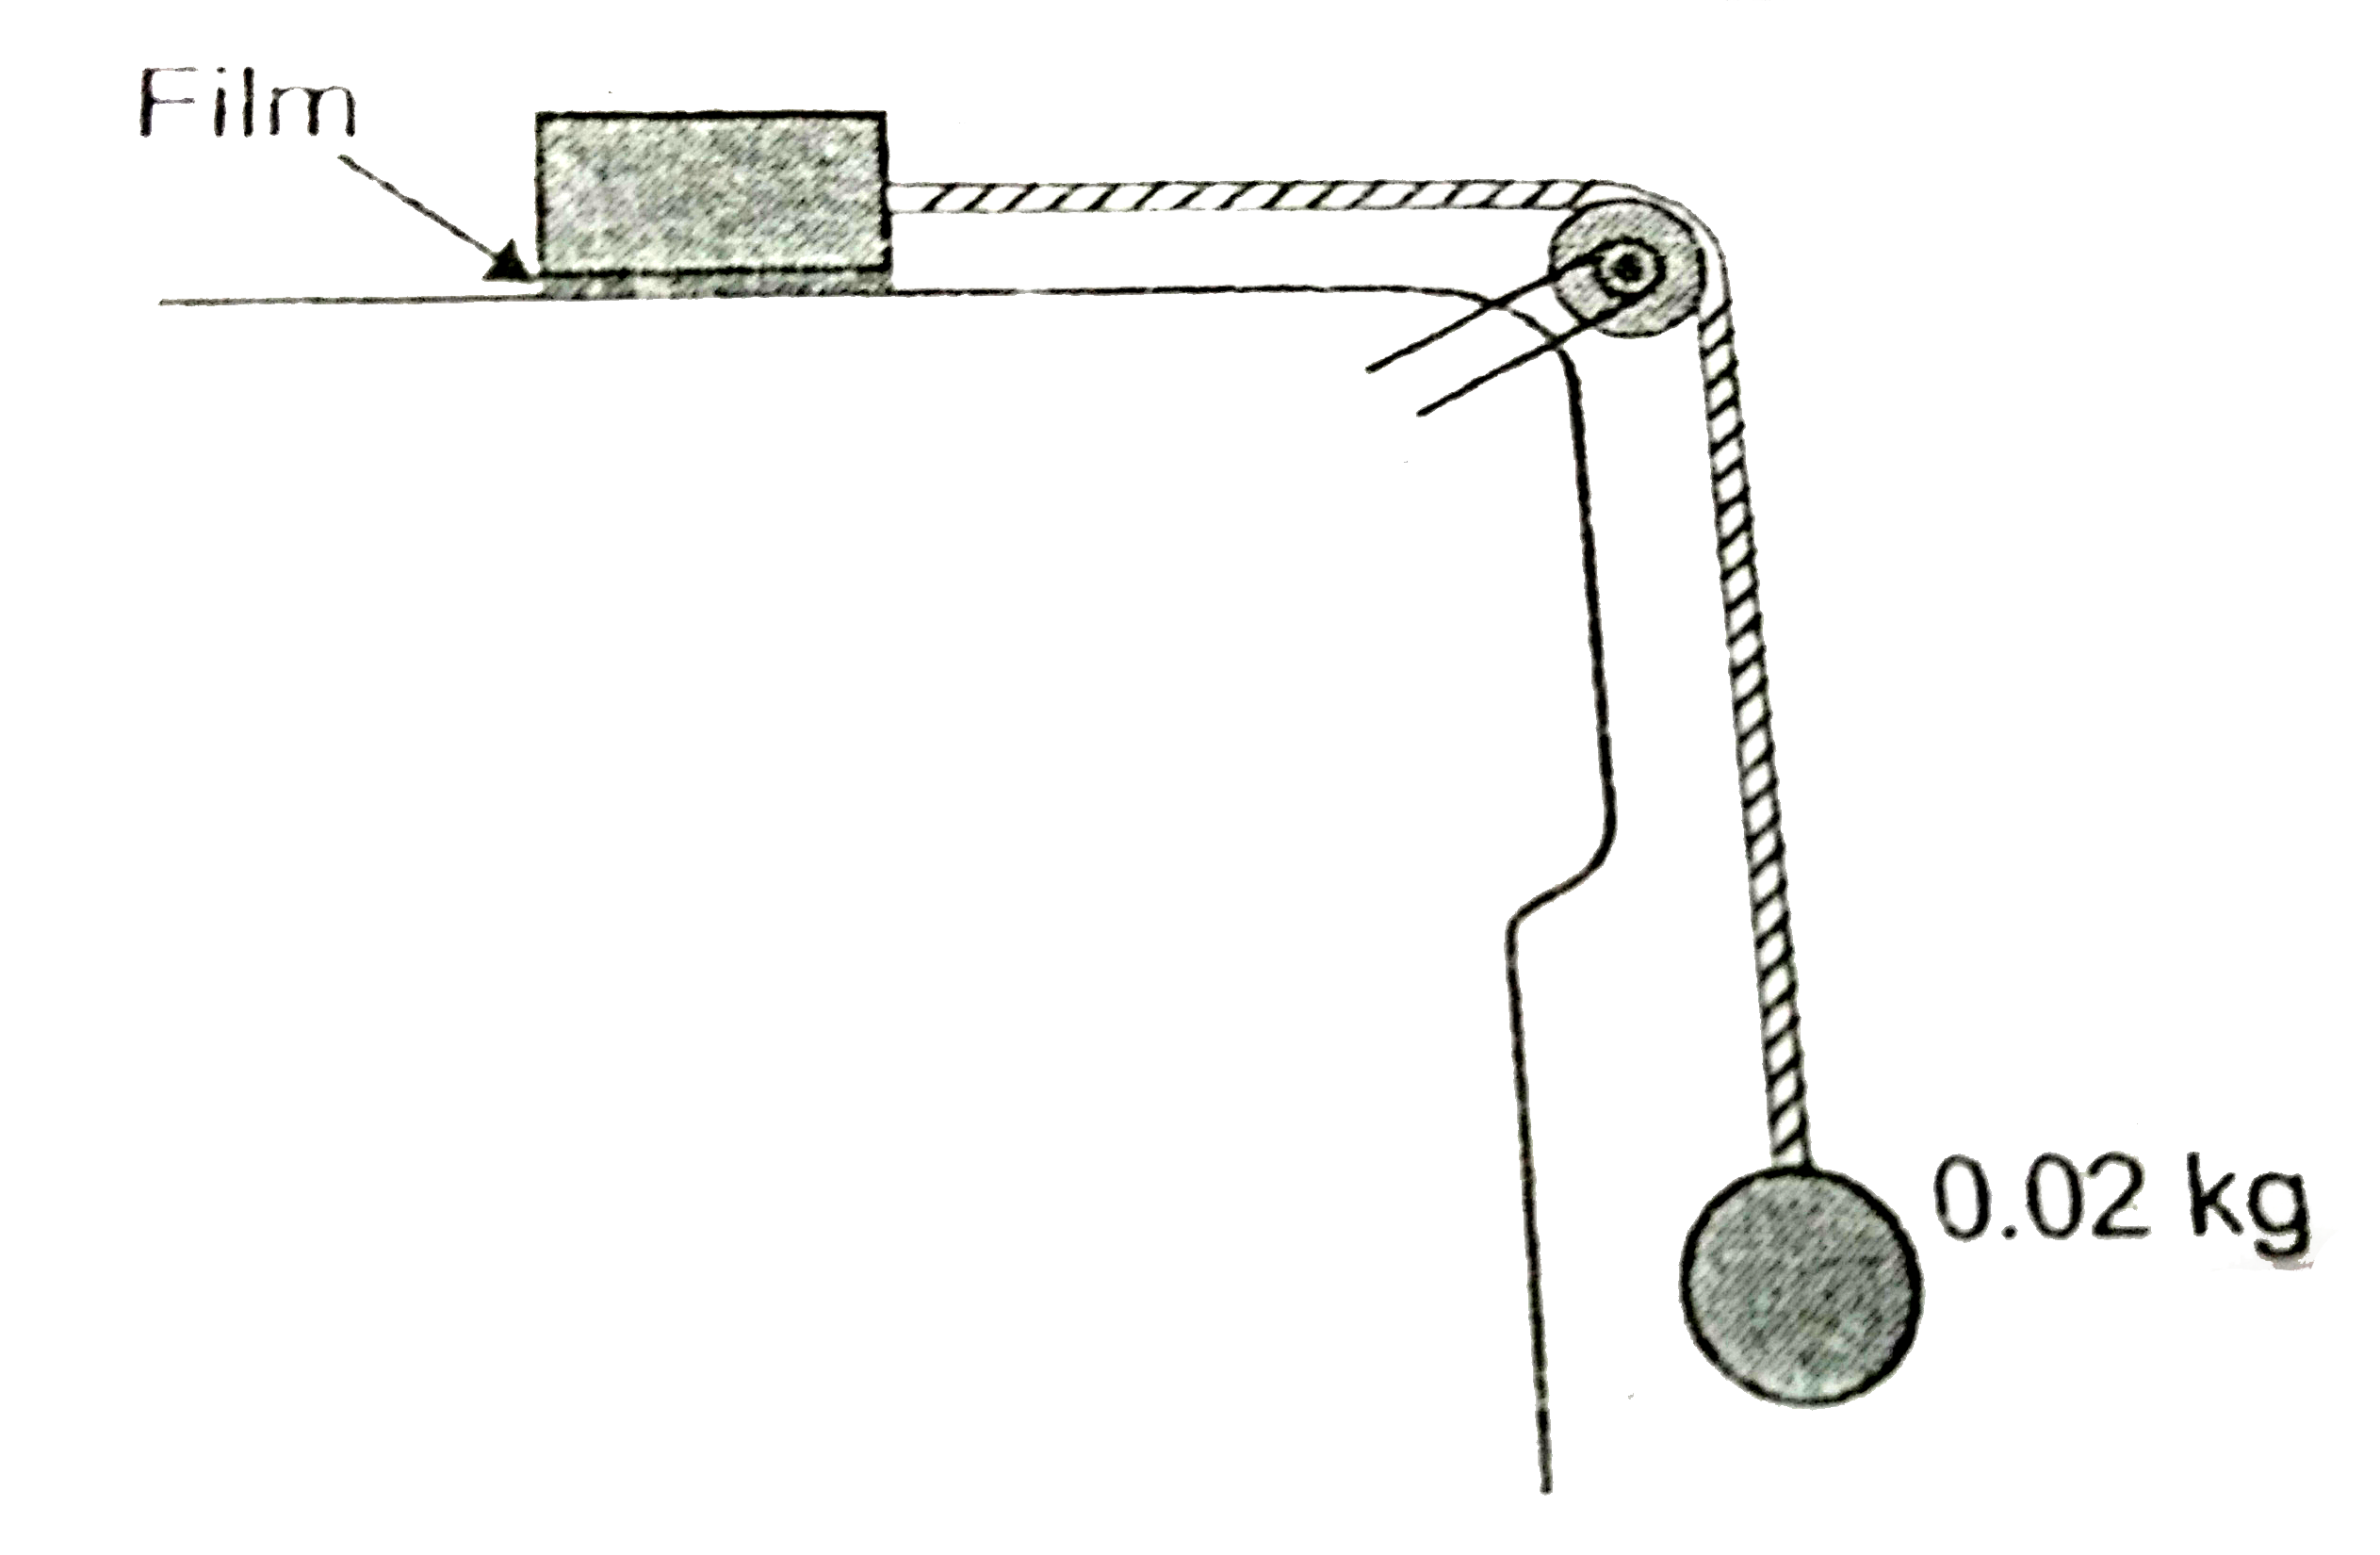 A metal block of area 0.10 m^(2) is connected to a 0.02 kg mass via a string. The string passes over an ideal pulley (considered massless and frictionless) as shown in figure. A liquid with a flim of thickness 0.15 mm is placed between the plate and the table. When released the plate movees to the right with a constant speed of 0.075 m s^(-1). What is the coefficient of viscosity of the liquid?